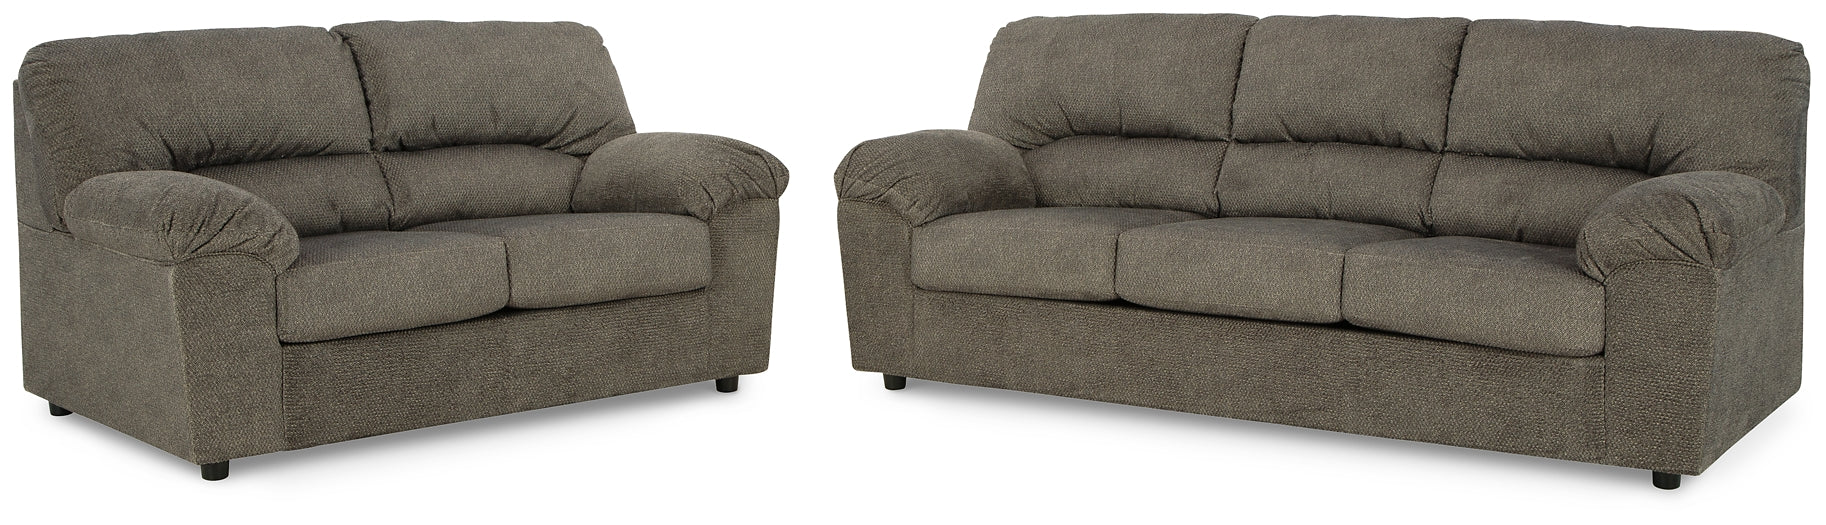 Norlou Sofa and Loveseat JB's Furniture  Home Furniture, Home Decor, Furniture Store